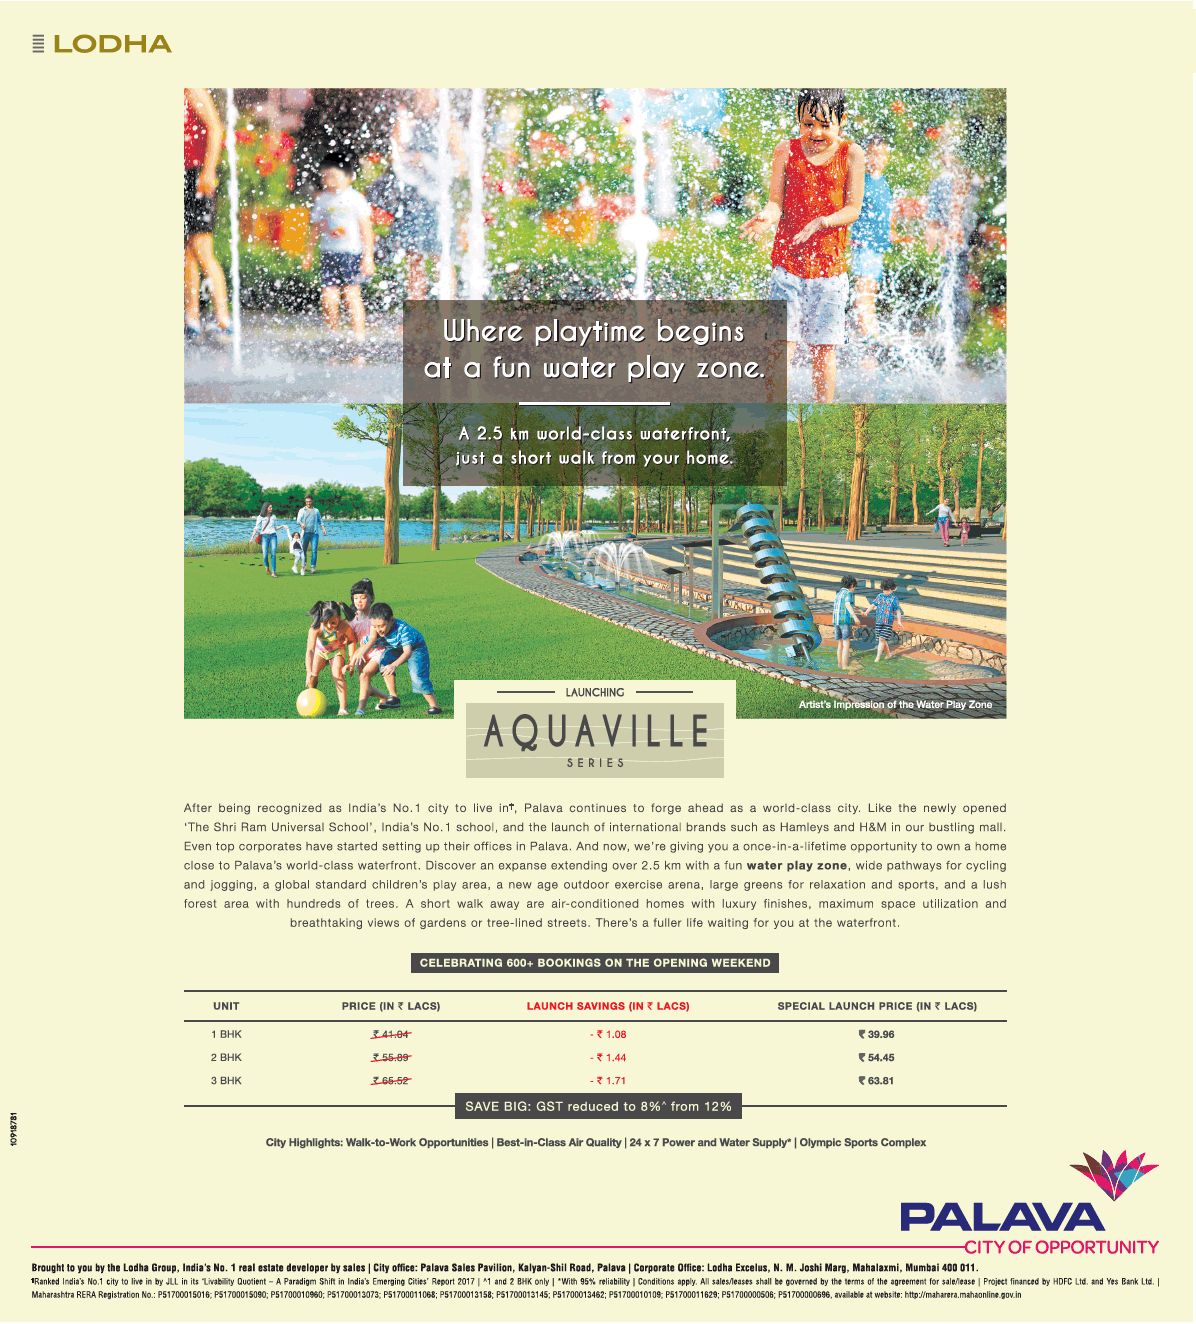 Take a short walk from your home in world-class waterfront at Lodha Palava Aquaville in Mumbai